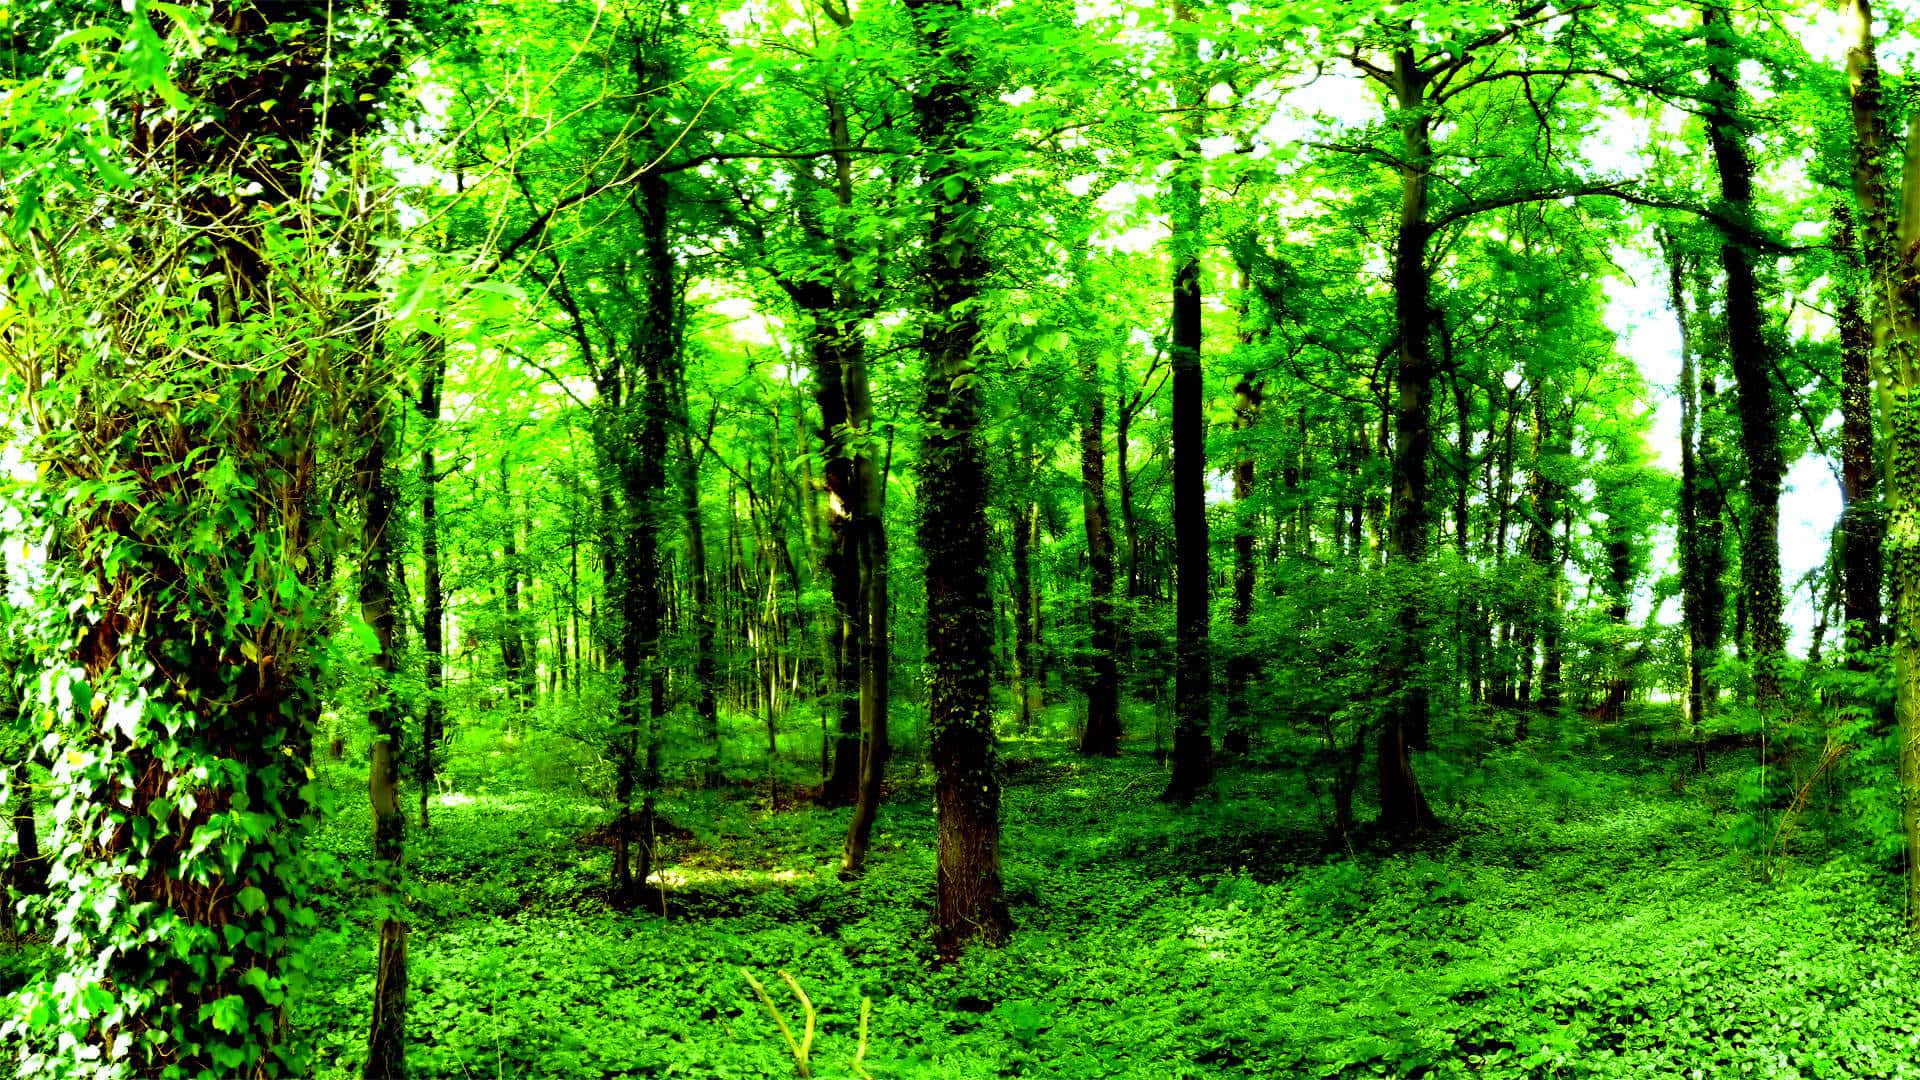 Nature At Its Finest: A Peaceful And Vibrant Forest Green Landscape Background